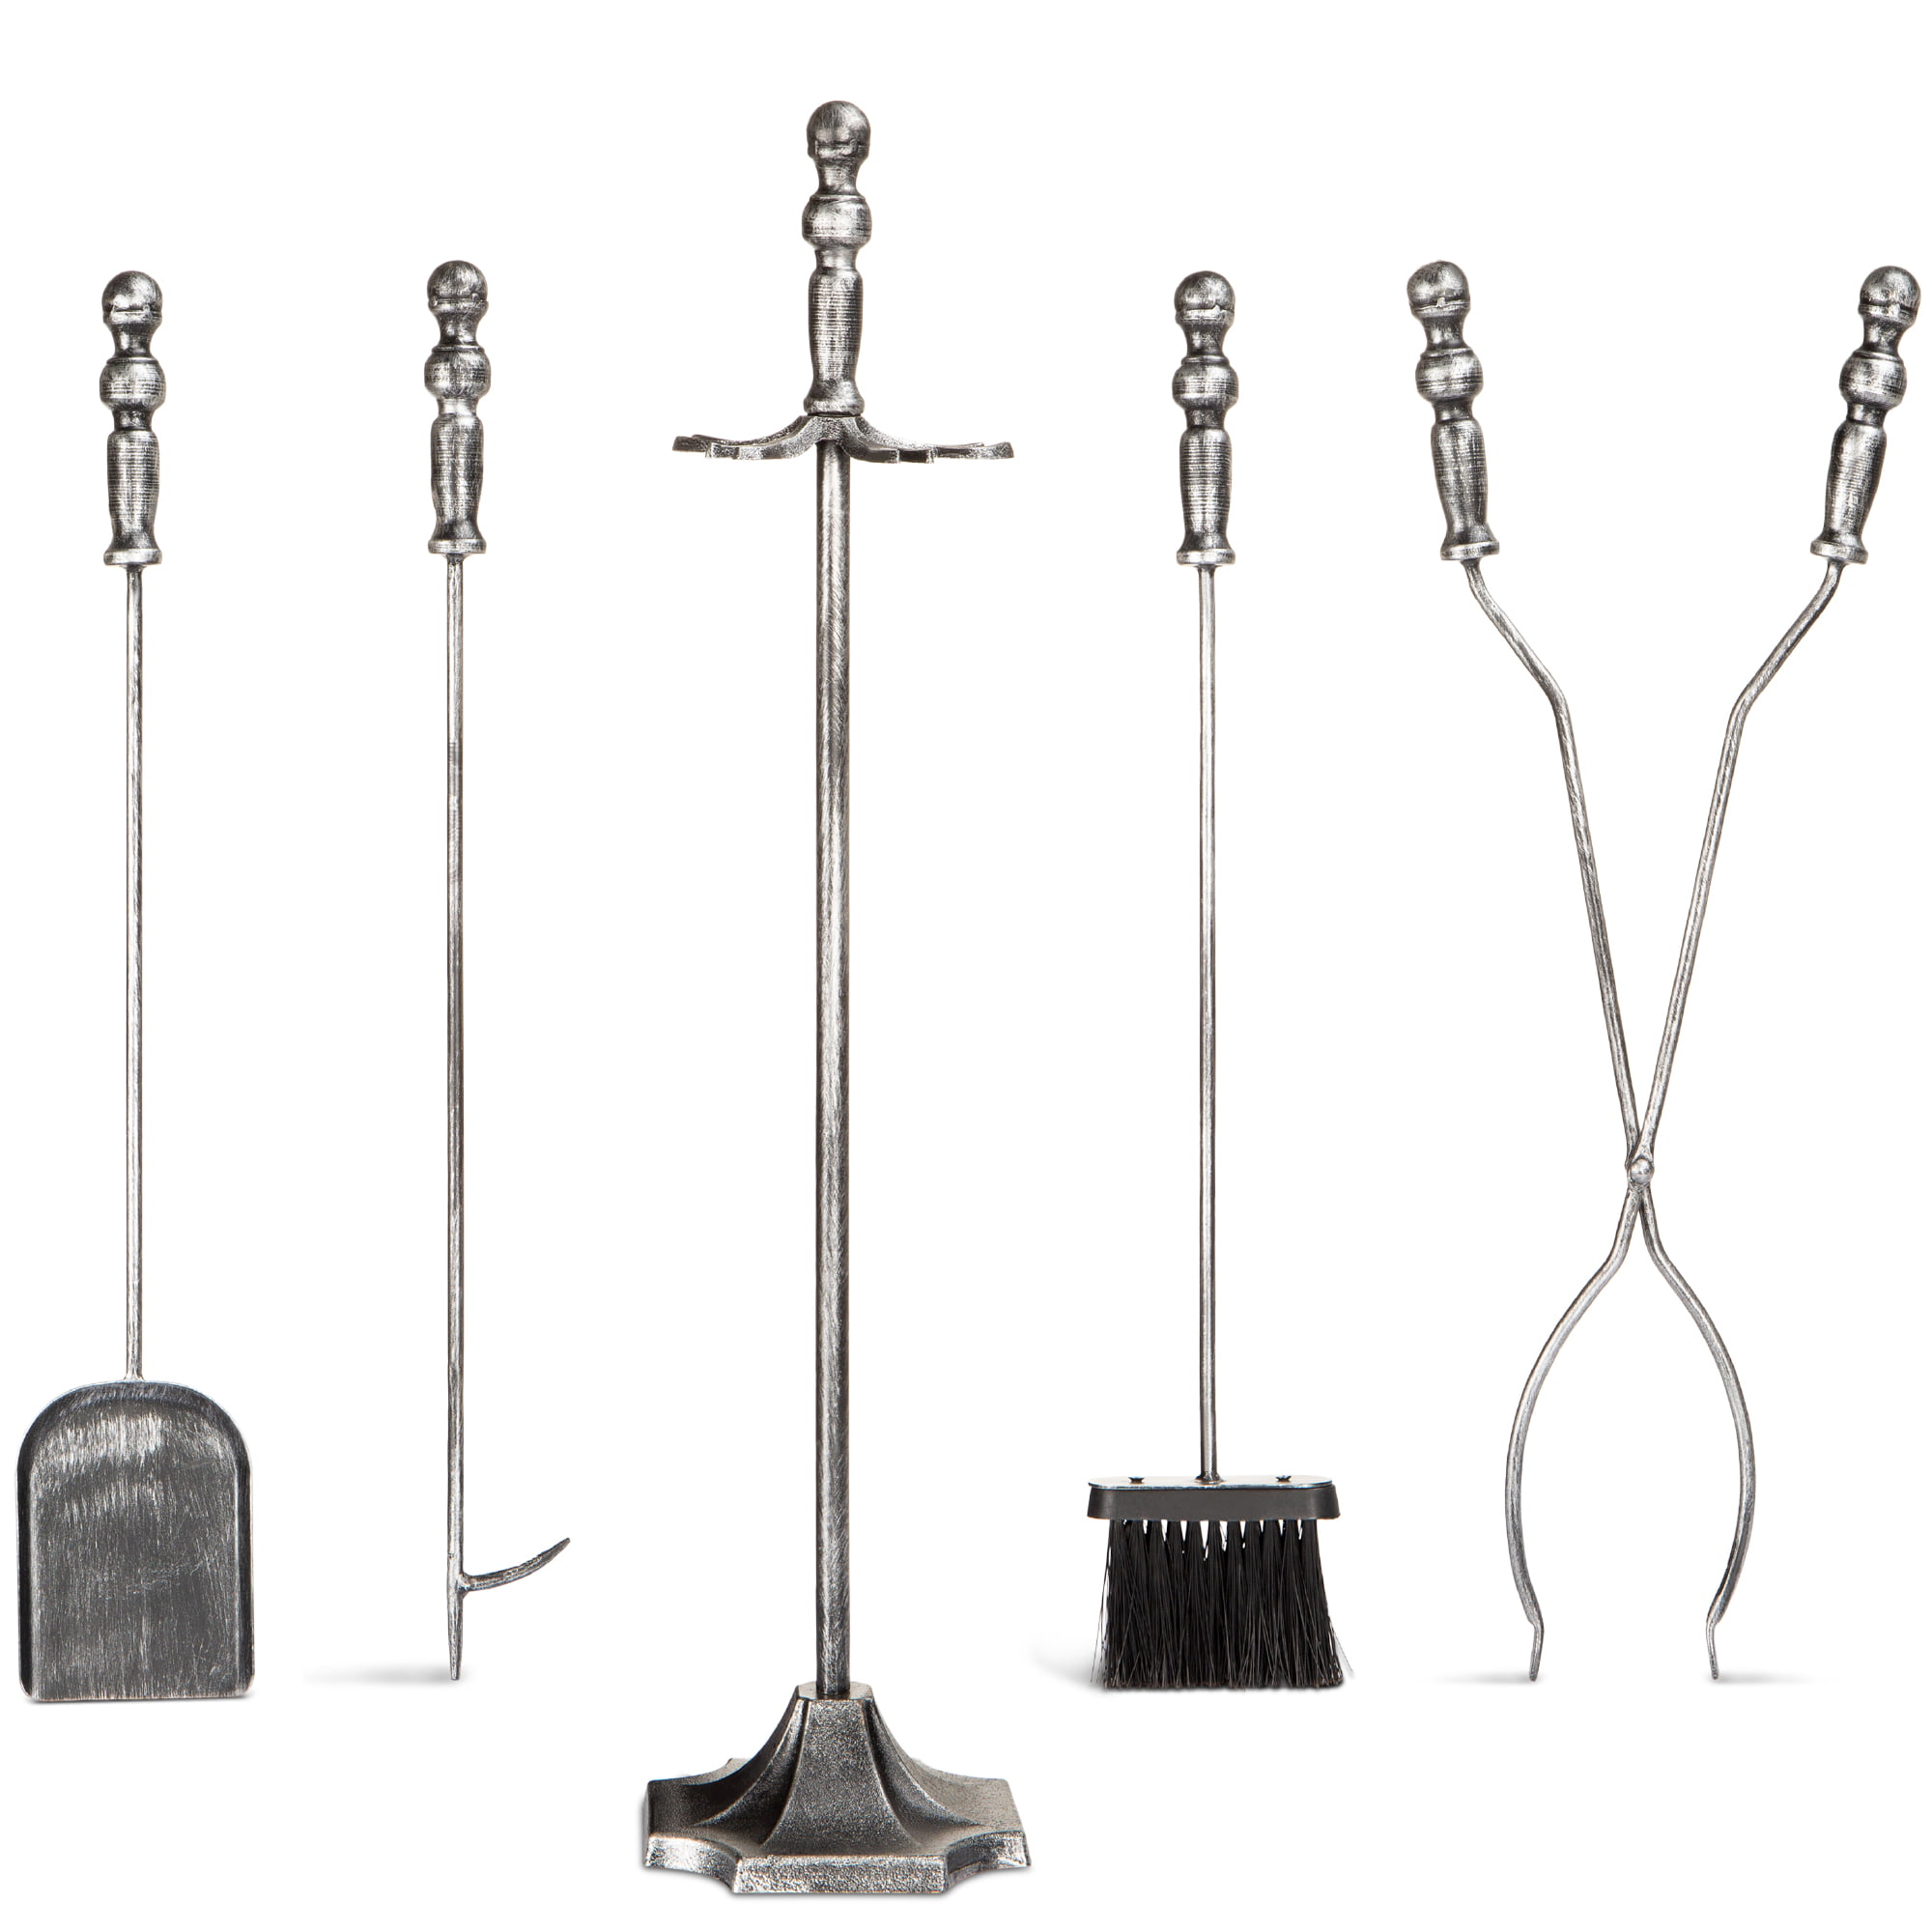 Relaxdays Modern Steel Fire Irons Tongs and Stand Poker Broom 5-Piece Fireplace Companion Set with Shovel Black 